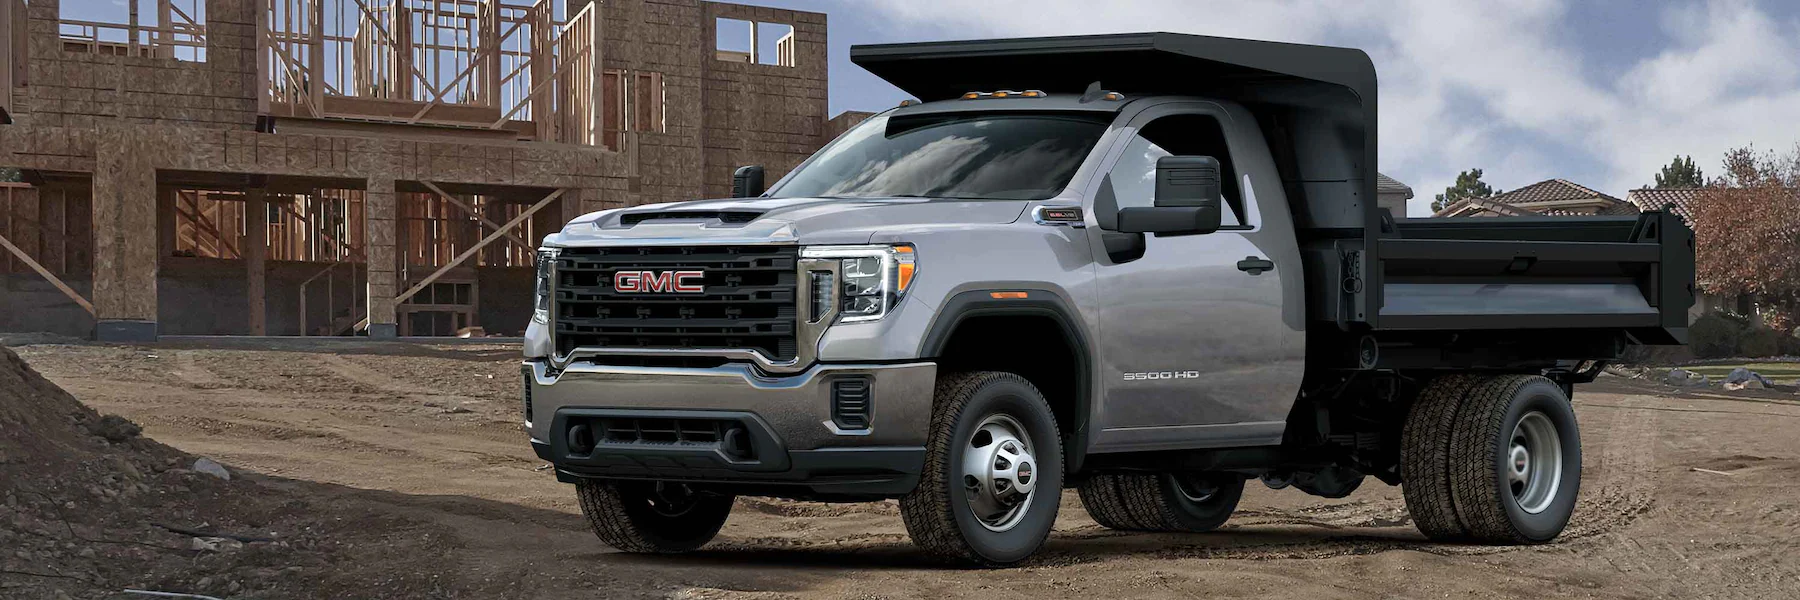 The 2023 GMC Sierra 3500 Chassis Cab at a jobsite.